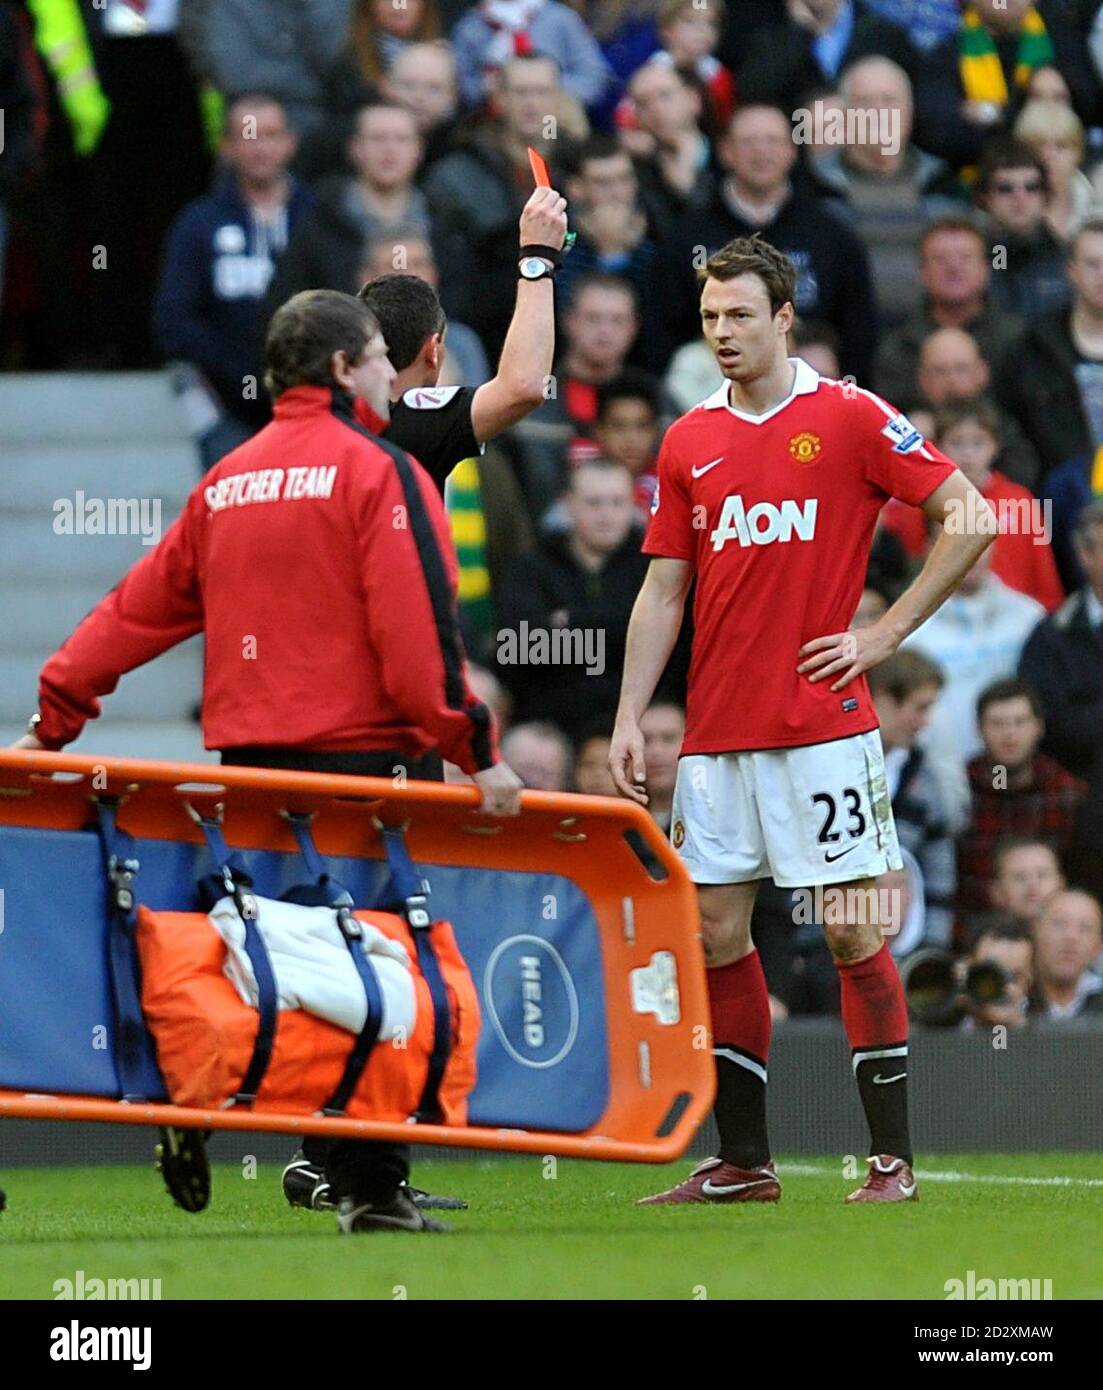 Referee Andre Marriner shows the red card to Manchester United's Jonny Evans Stock Photo